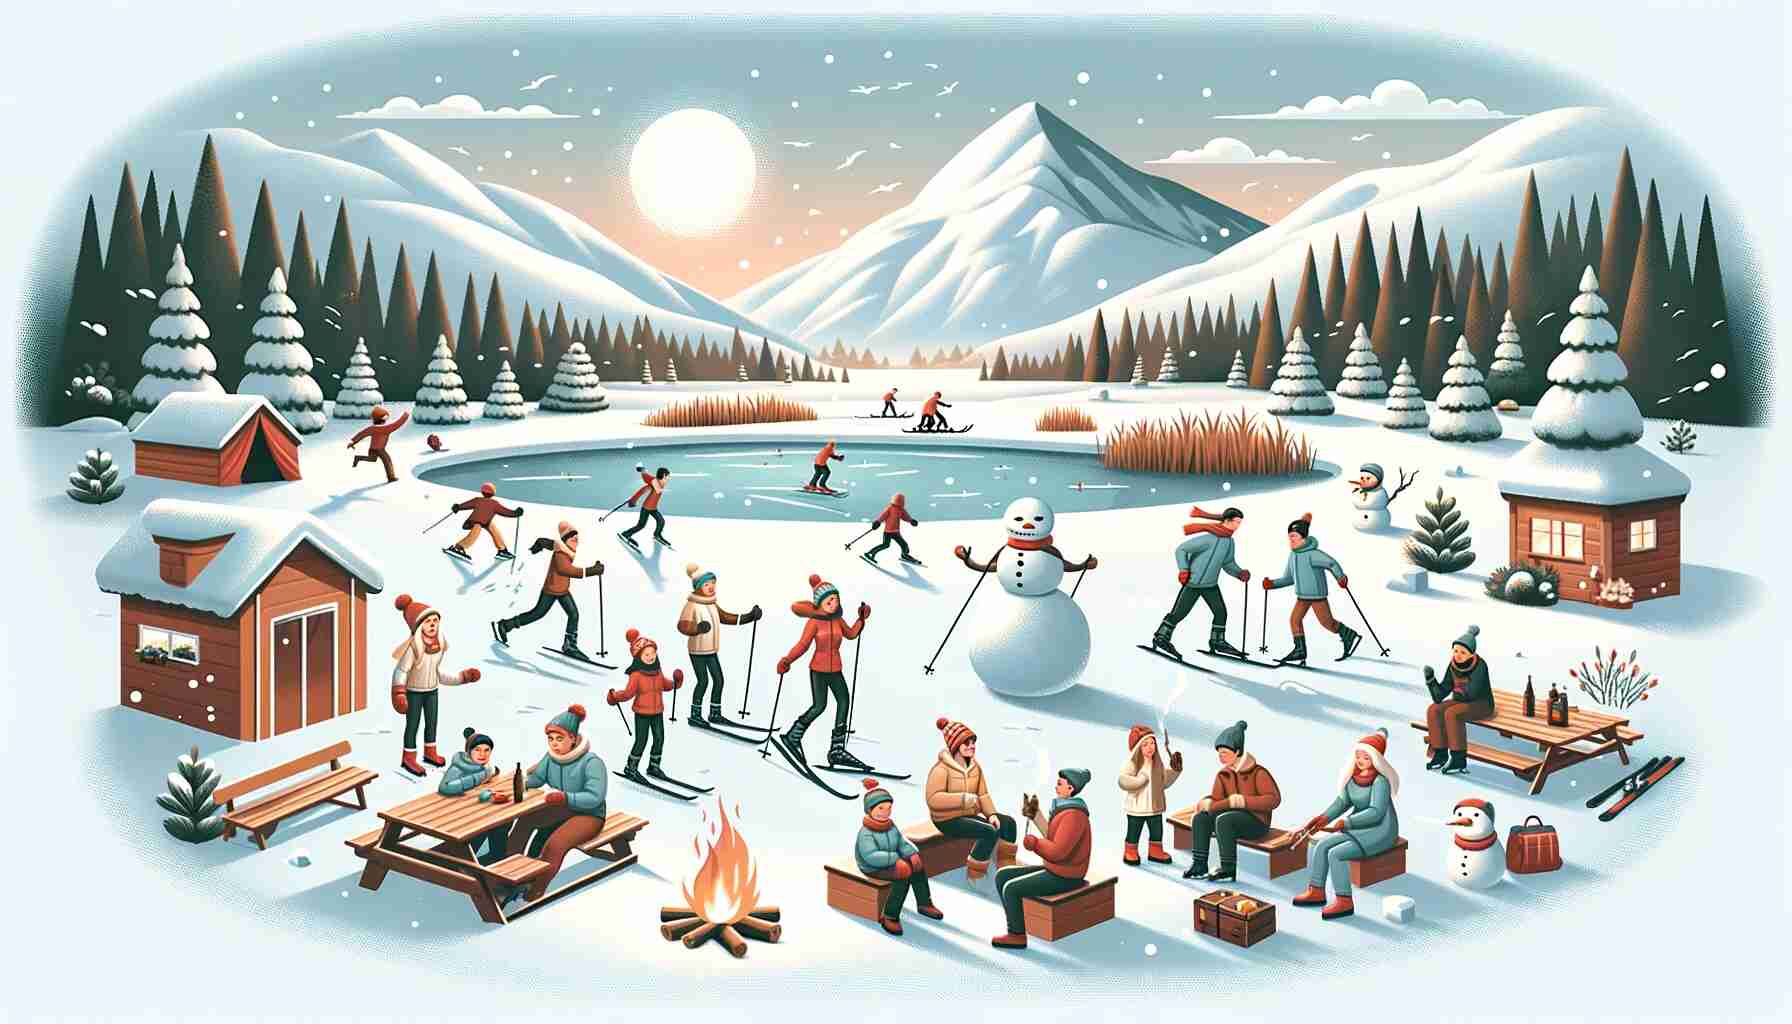 A vibrant winter landscape featuring a family engaged in various outdoor activities. In the background, there are snow-covered mountains and a frozen lake with people ice skating. A snowy forest area hosts others building a snowman and having a snowball fight. In the foreground, an individual is cross-country skiing, and a group is gathered around a campfire, roasting marshmallows. The scene is illuminated by a warm glow from the winter sun, creating a cheerful and active winter atmosphere.